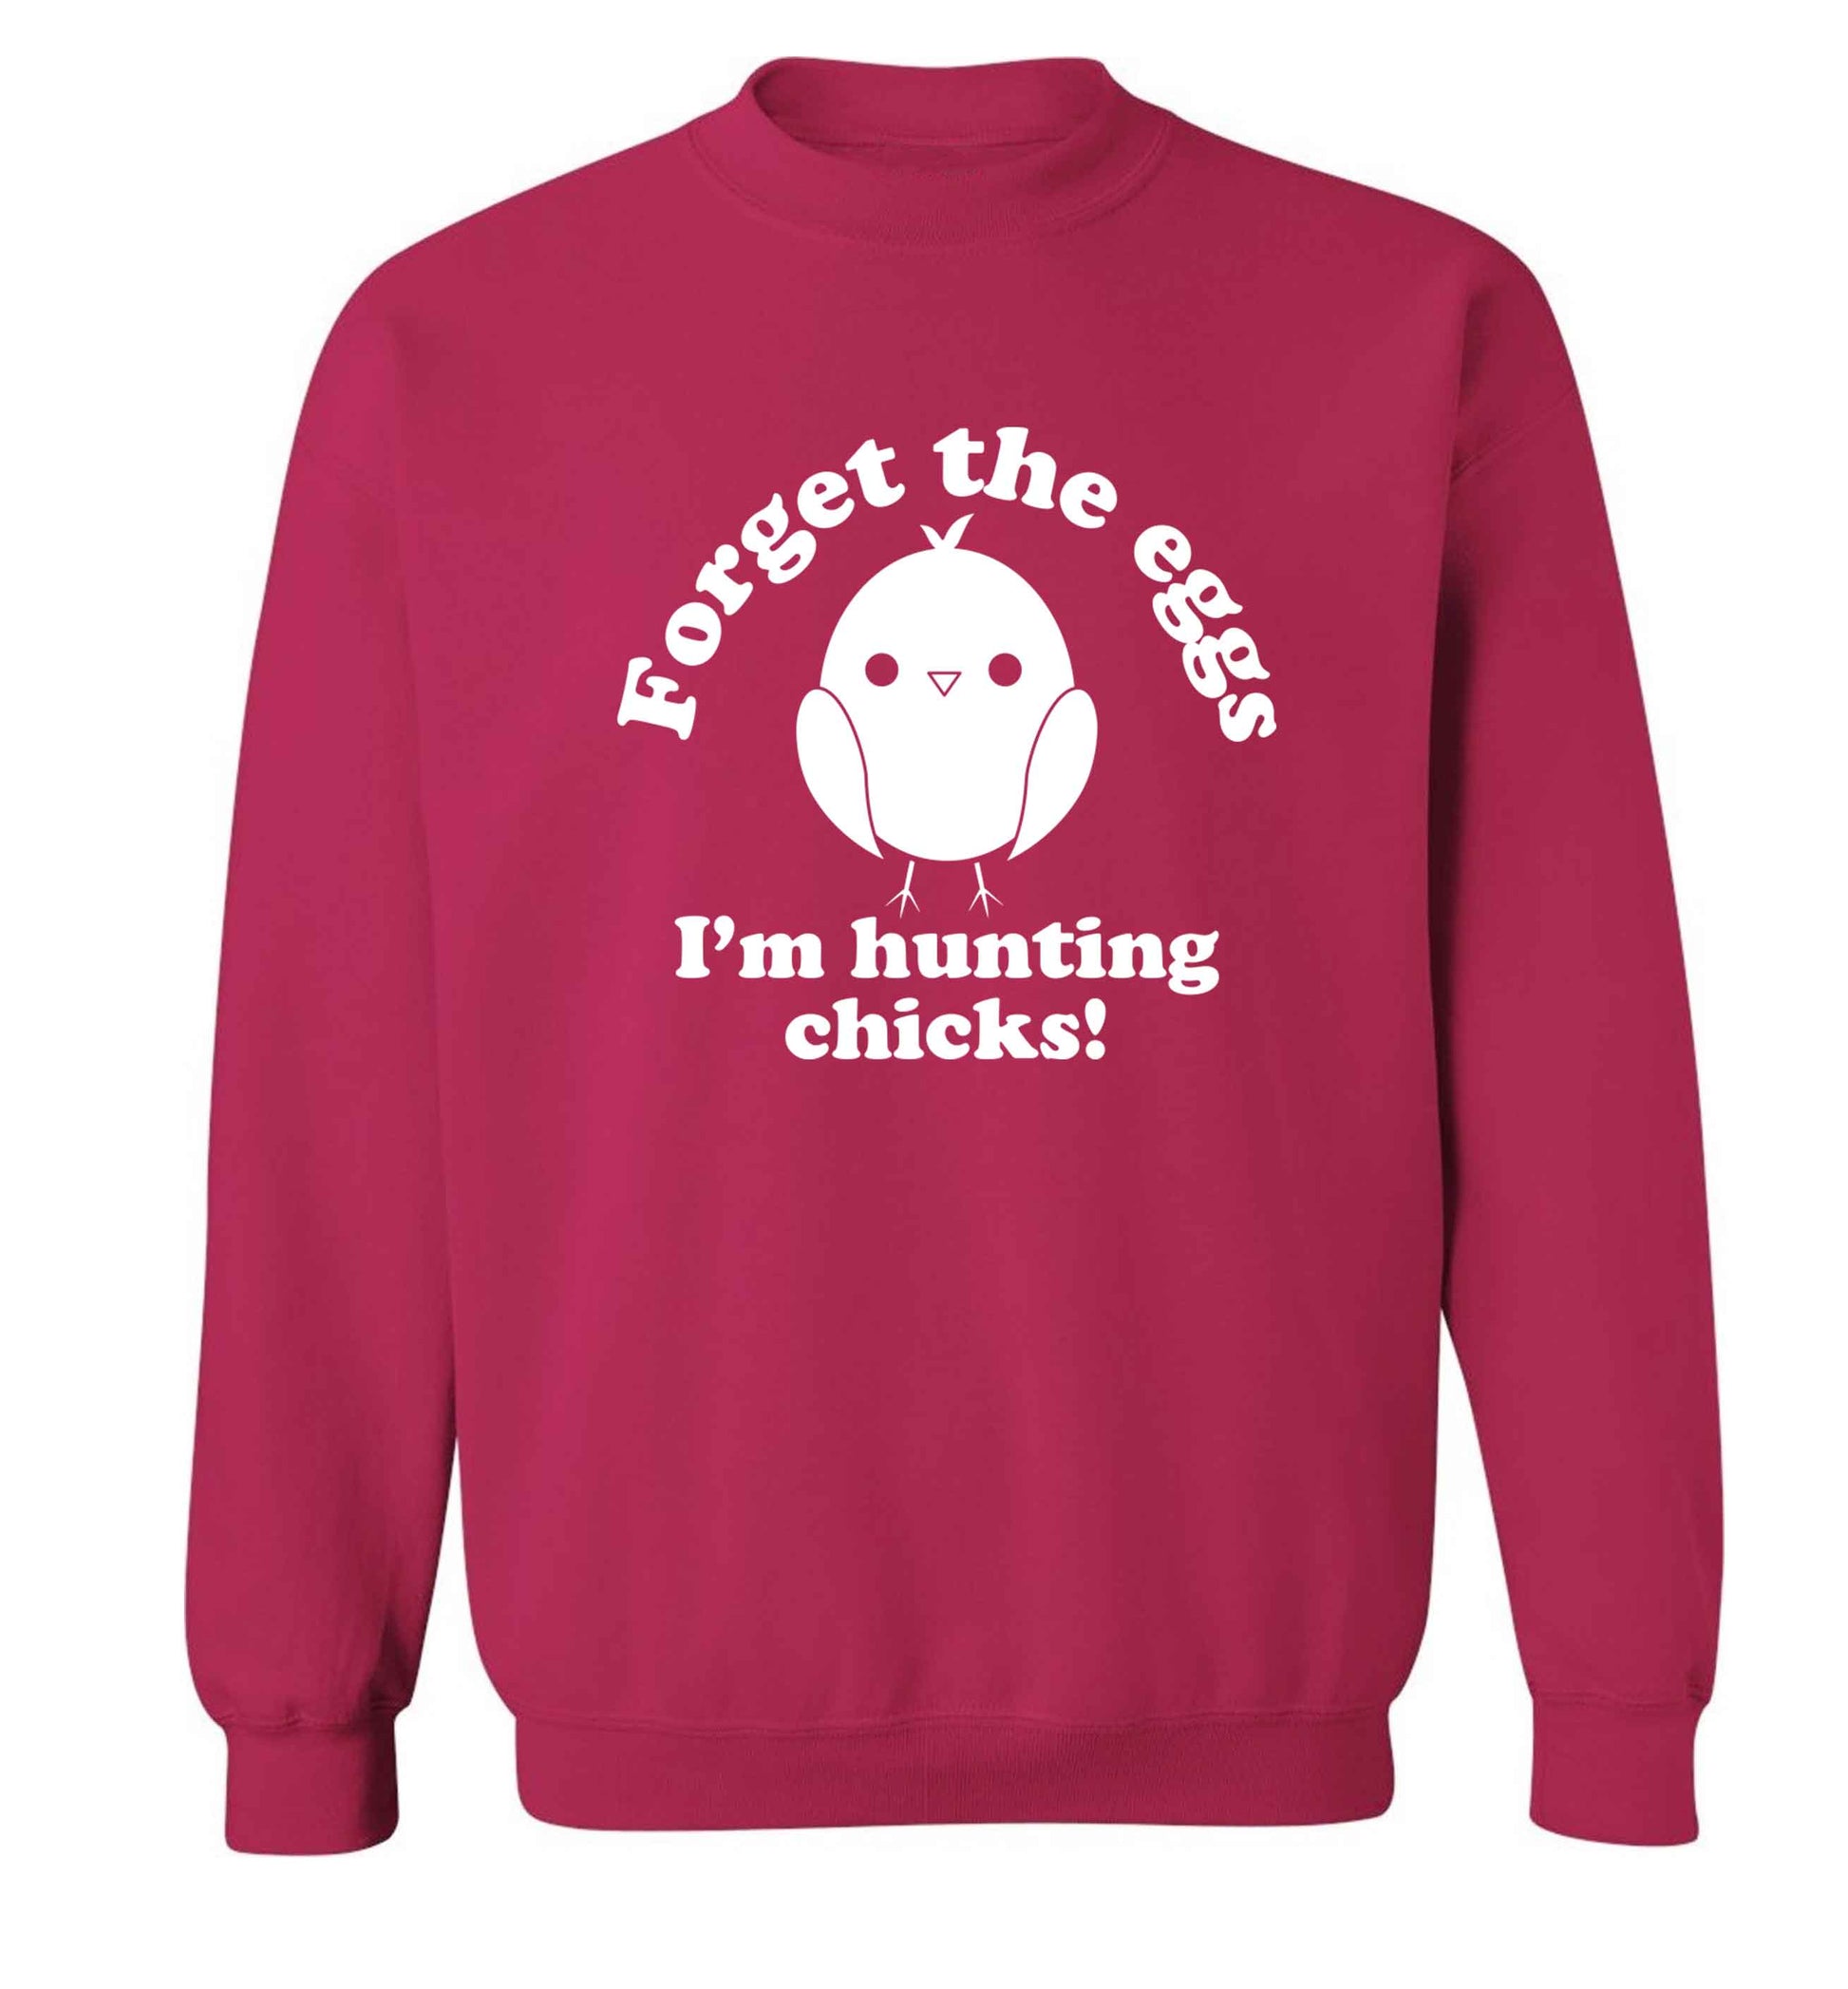 Forget the eggs I'm hunting chicks! adult's unisex pink sweater 2XL